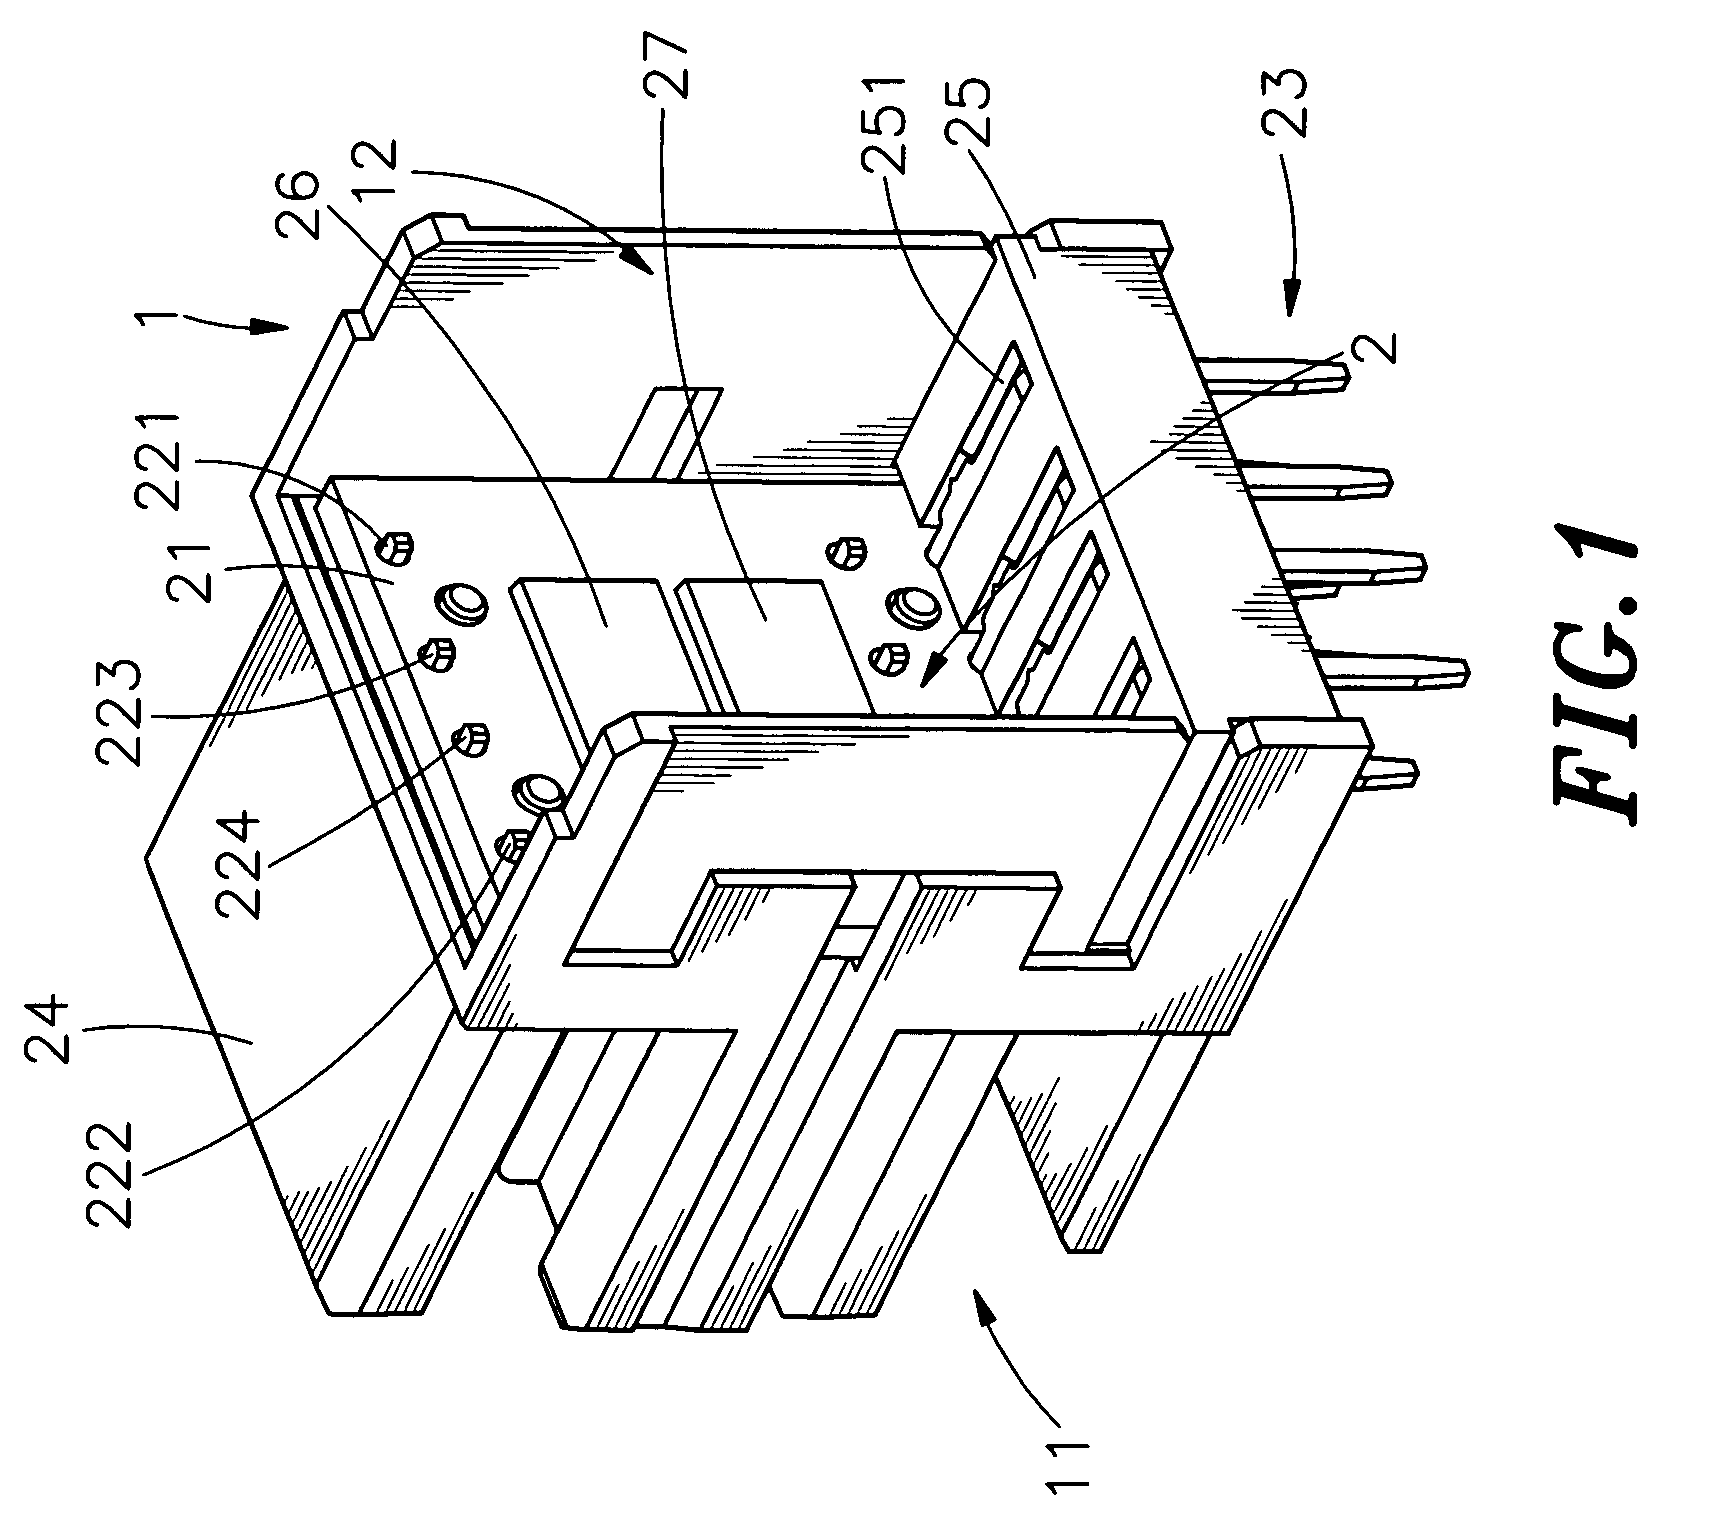 Structure of USB connector with power and signal filter modules